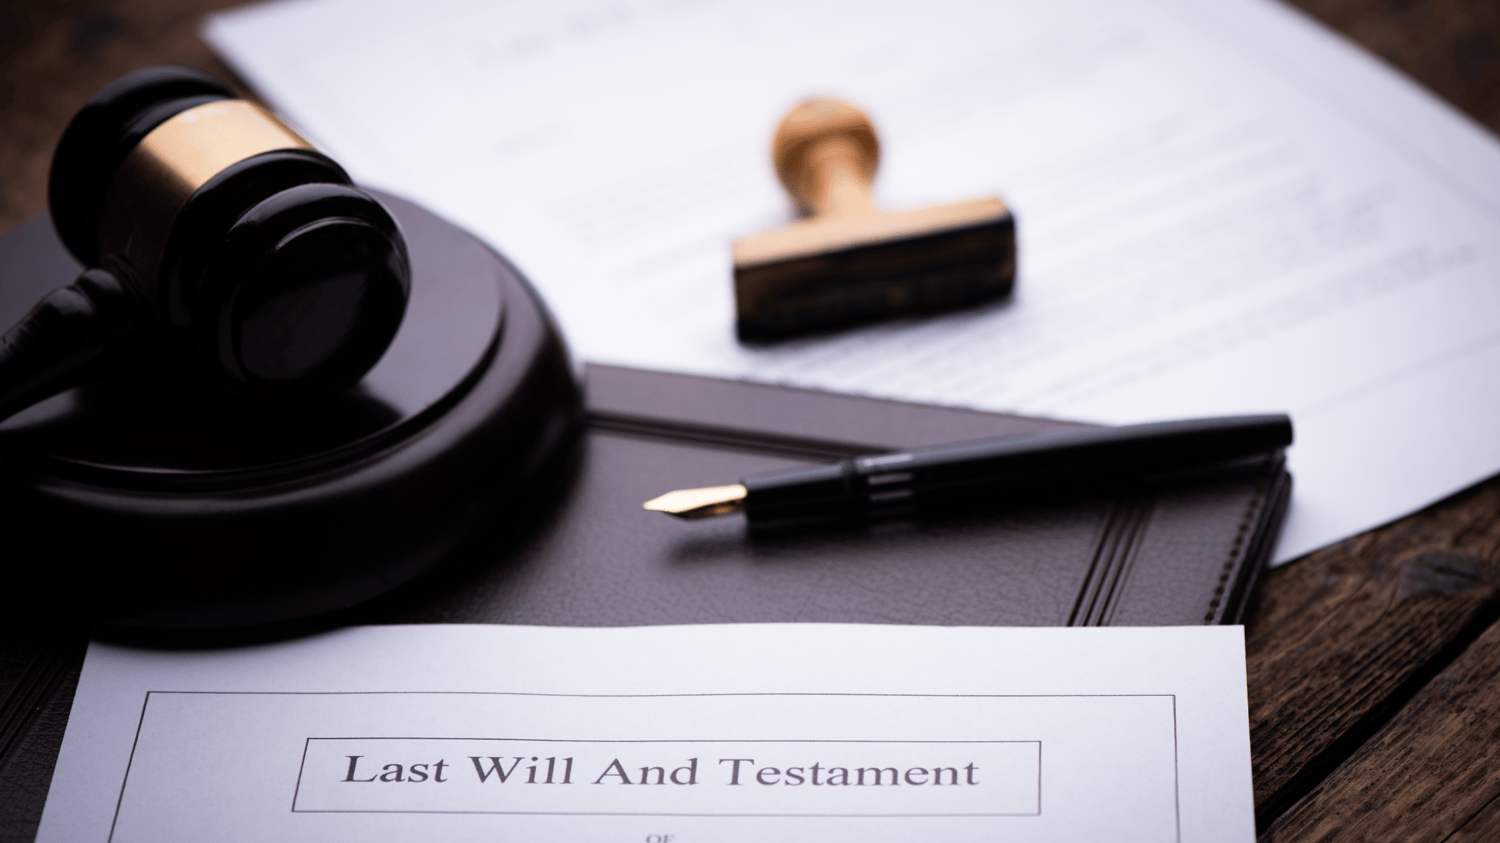 THE IMPORTANCE OF HAVING A WILL - WHY EVERYONE SHOULD HAVE ONE